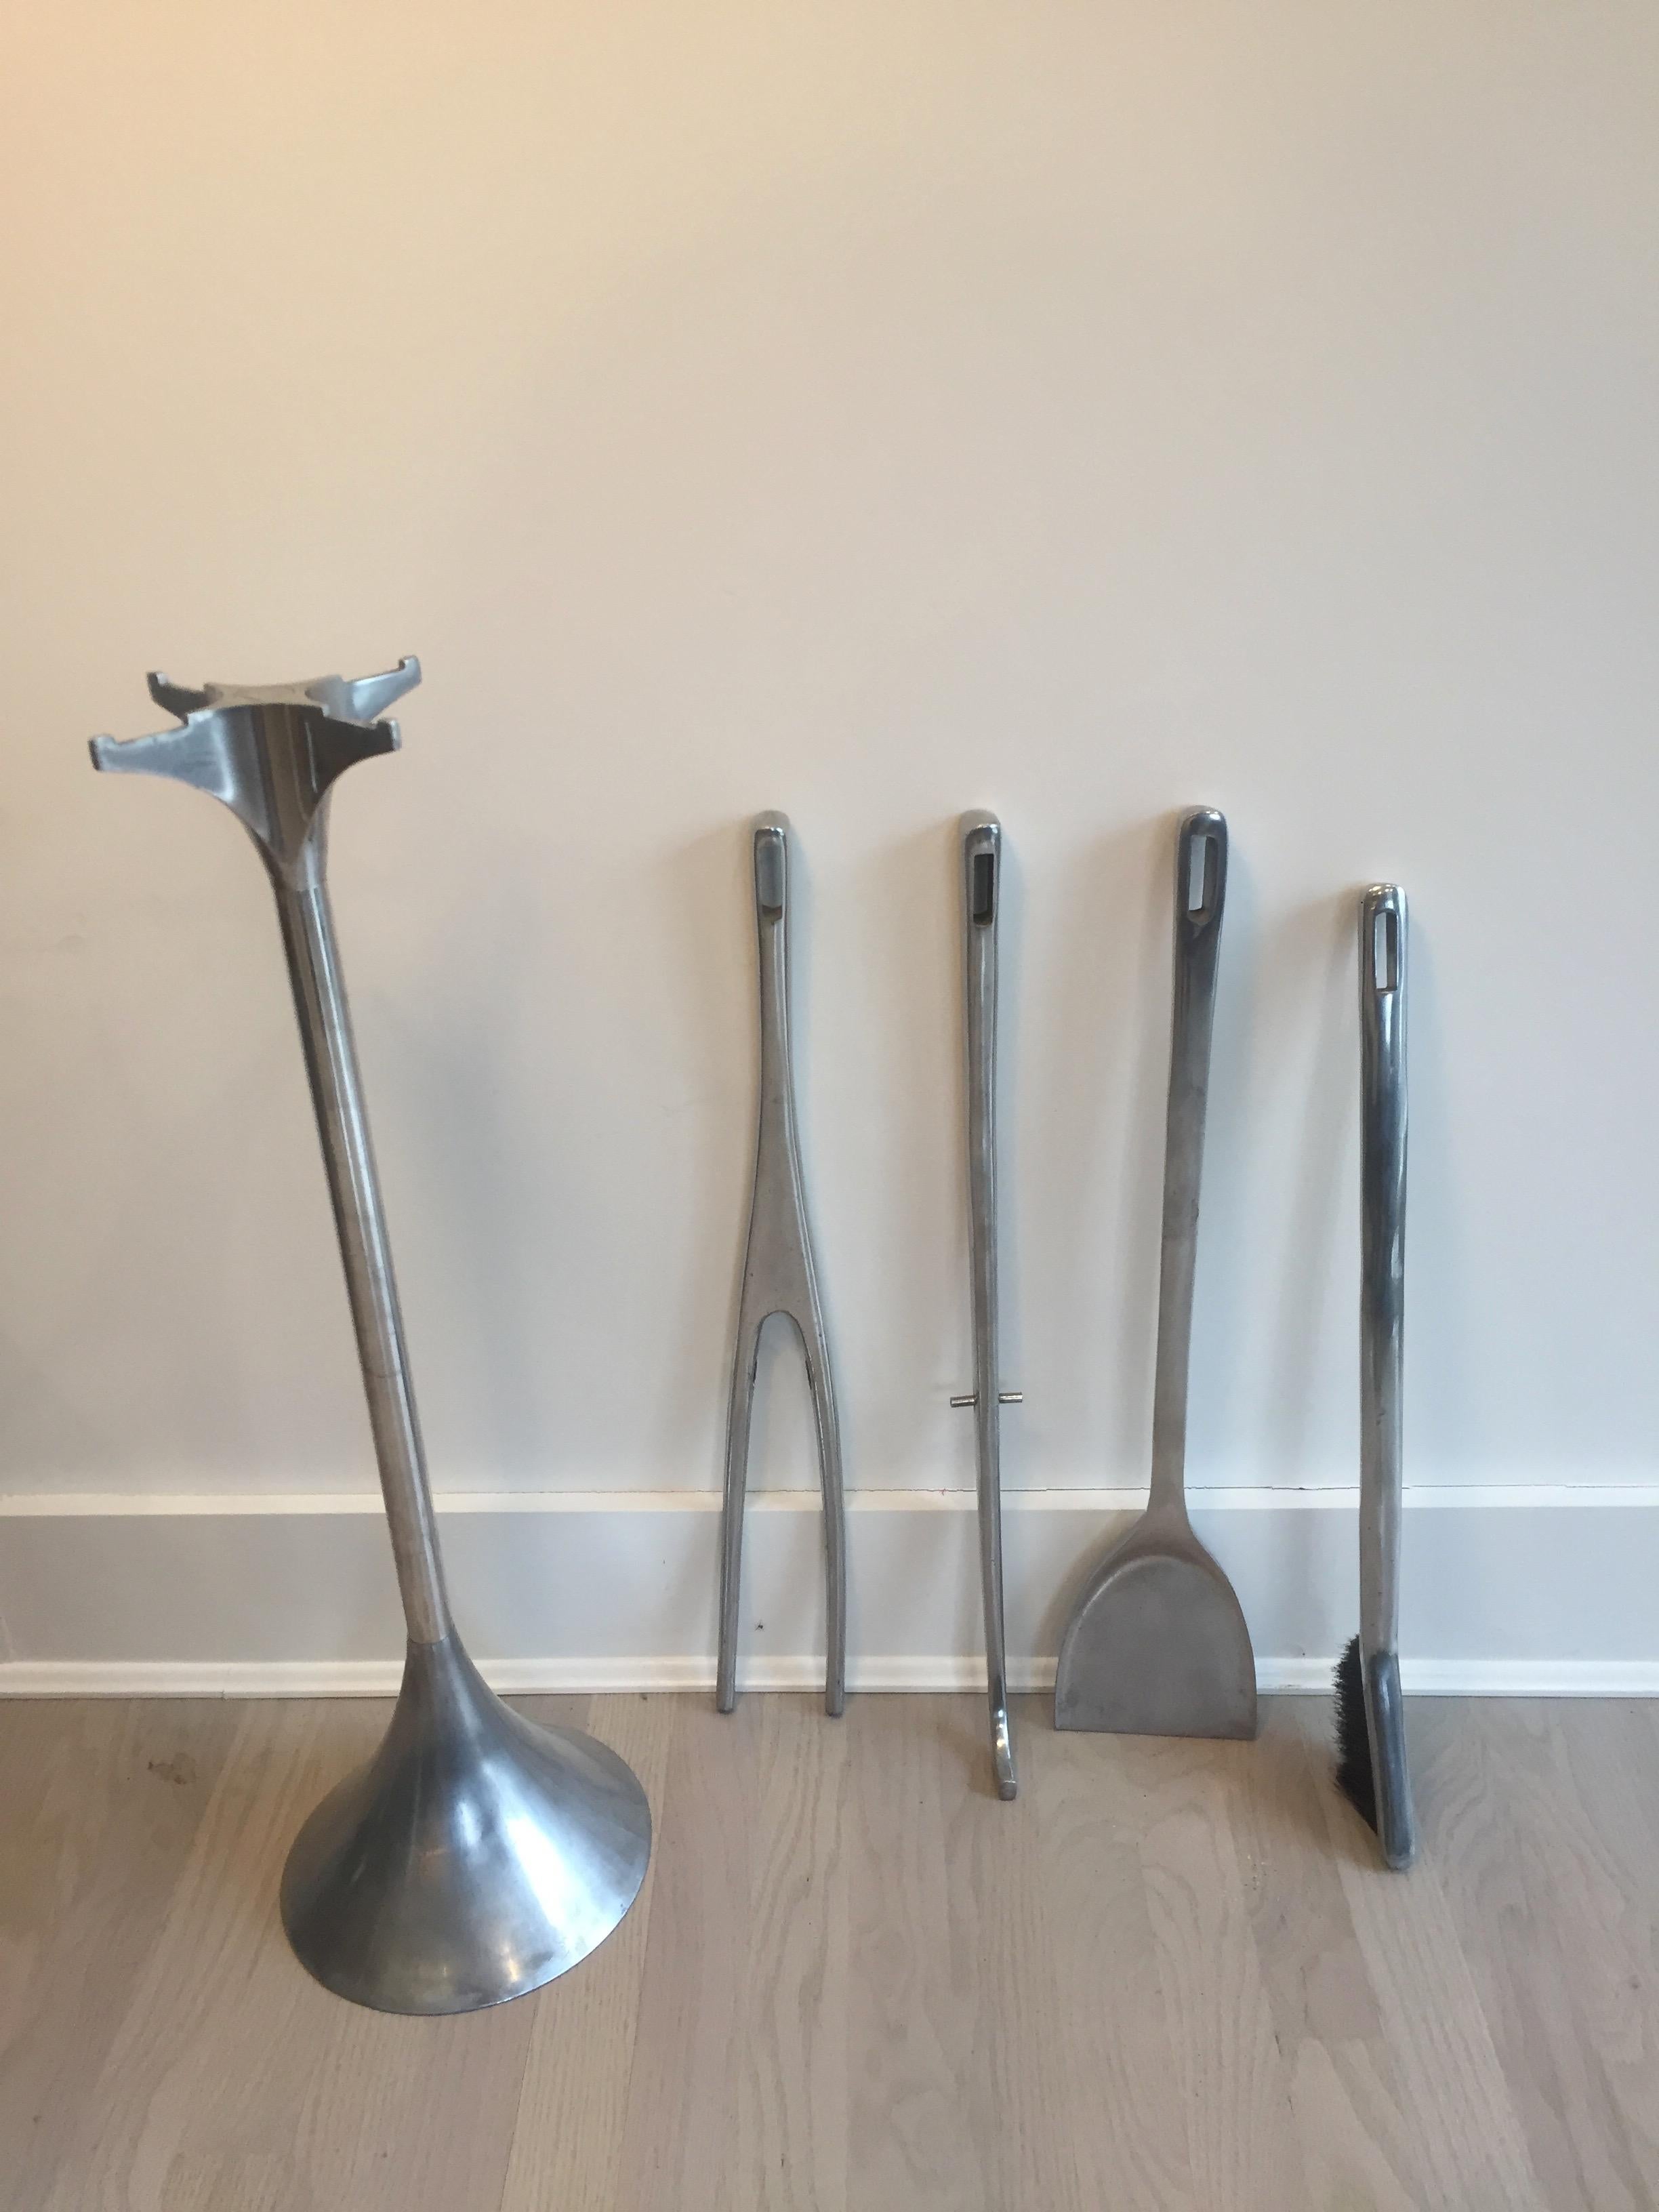 Aluminum ‘Fuego’ fireplace tool set by Umbra. Manufactured in the 1980s this has become a collectors item. Set comprises of a stand, poker, brush, shovel, hook and the log carrier with a leather saddle(which is hard to find). Slight age